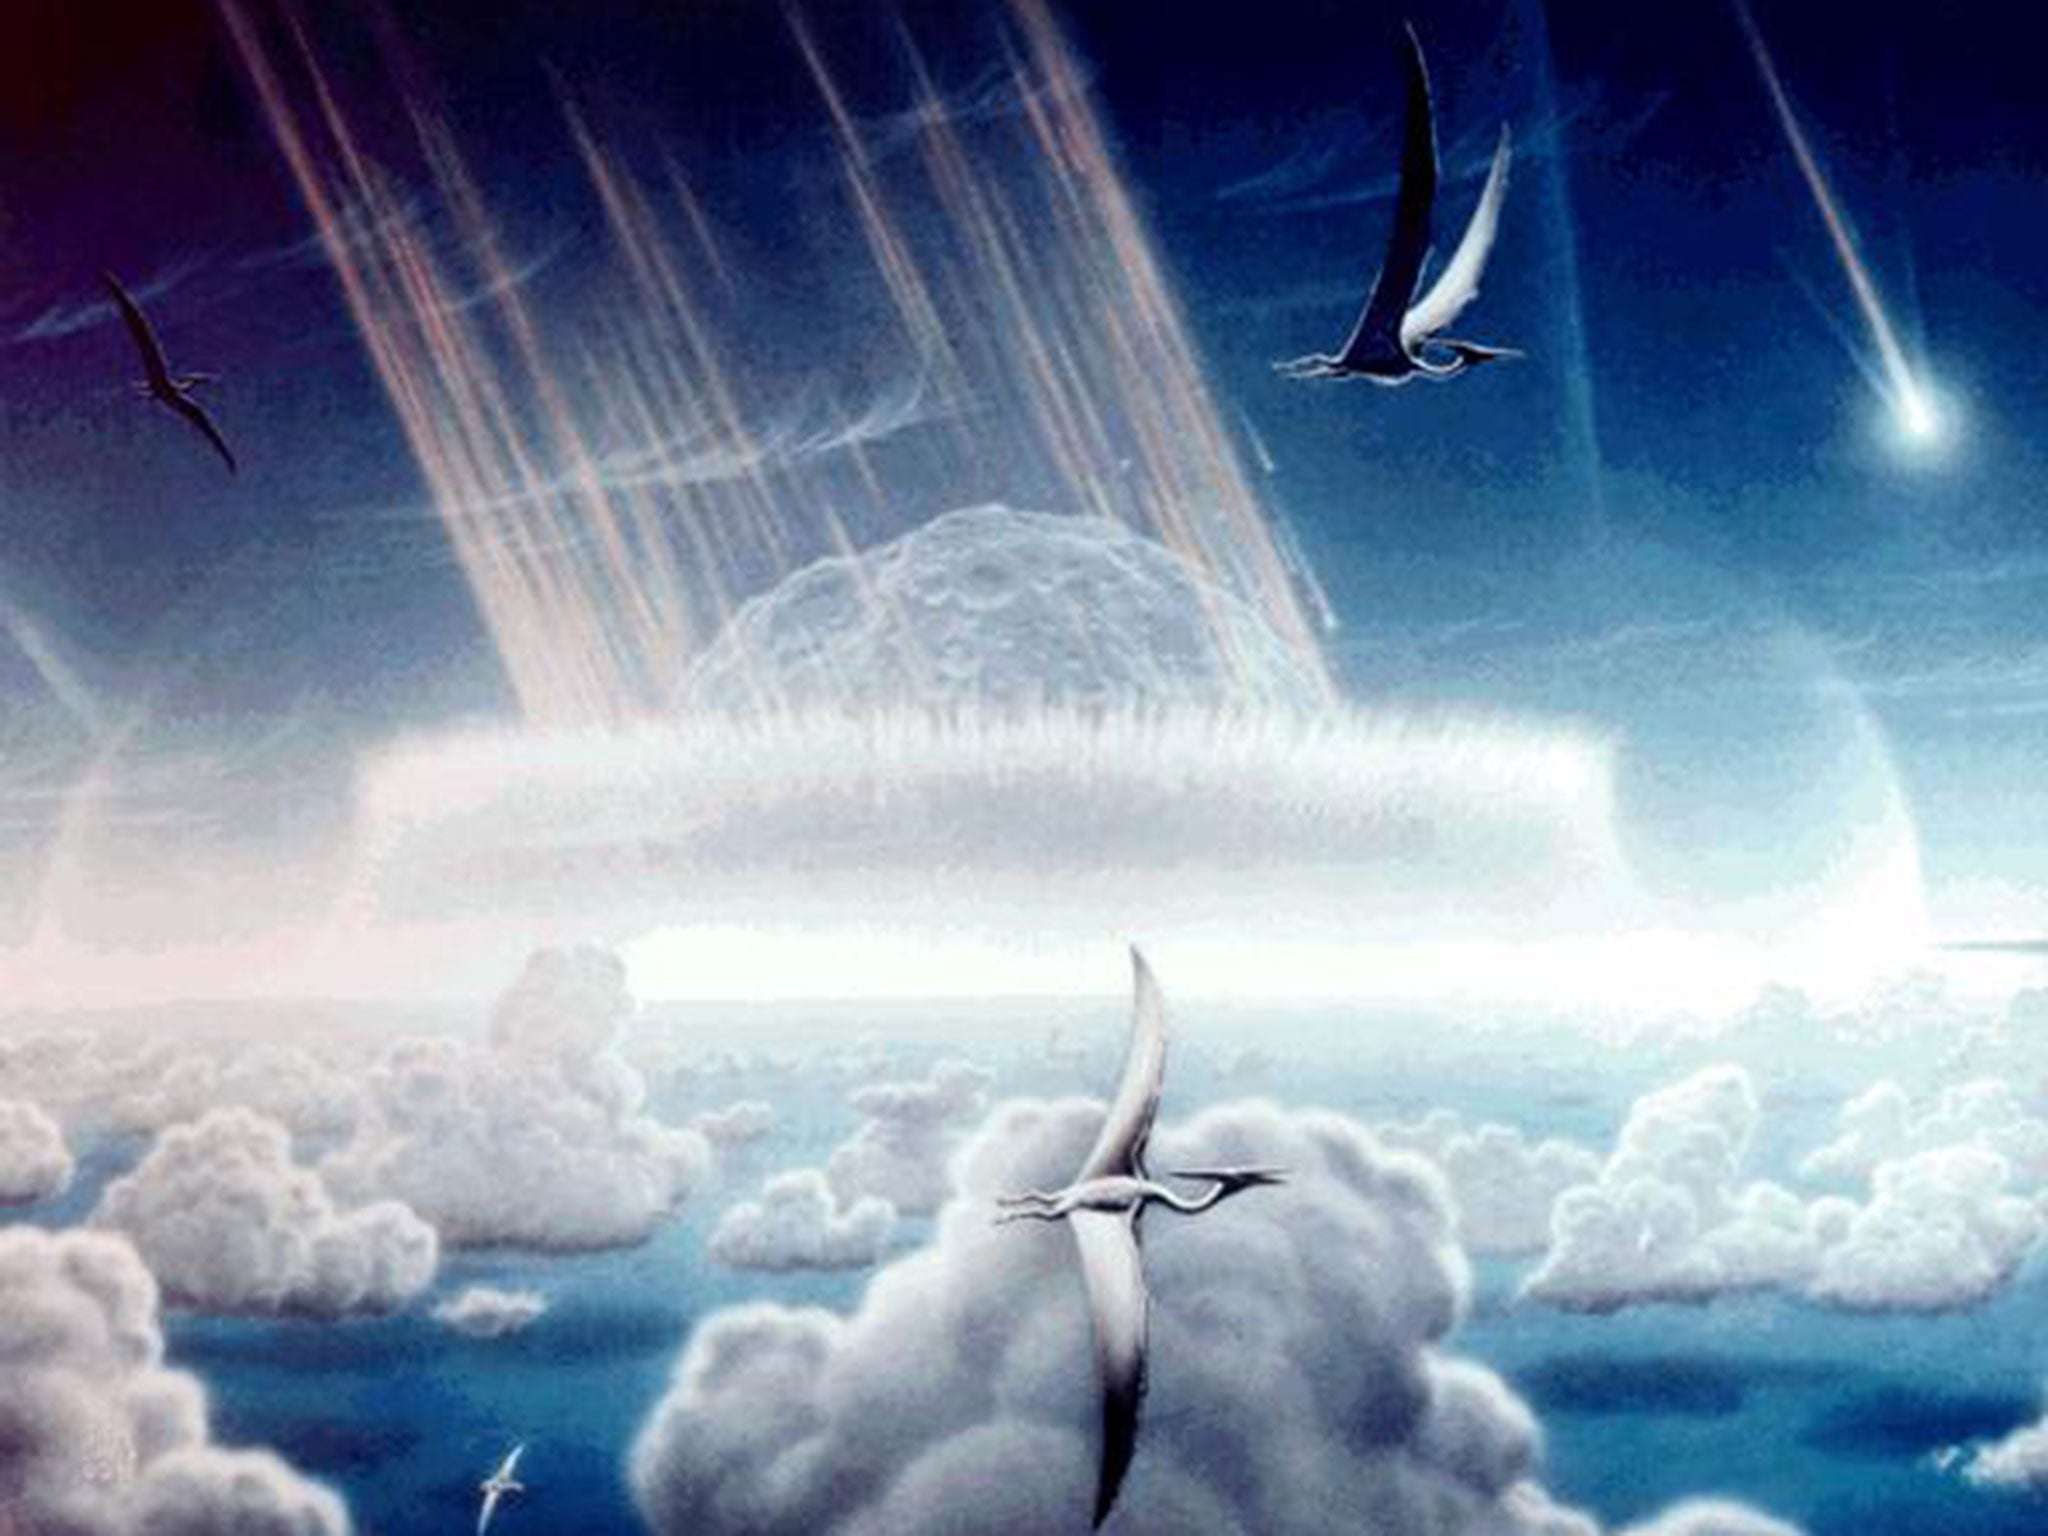 An artists impression of the Chicxulub asteroid which is believed to have wiped out the dinosaurs